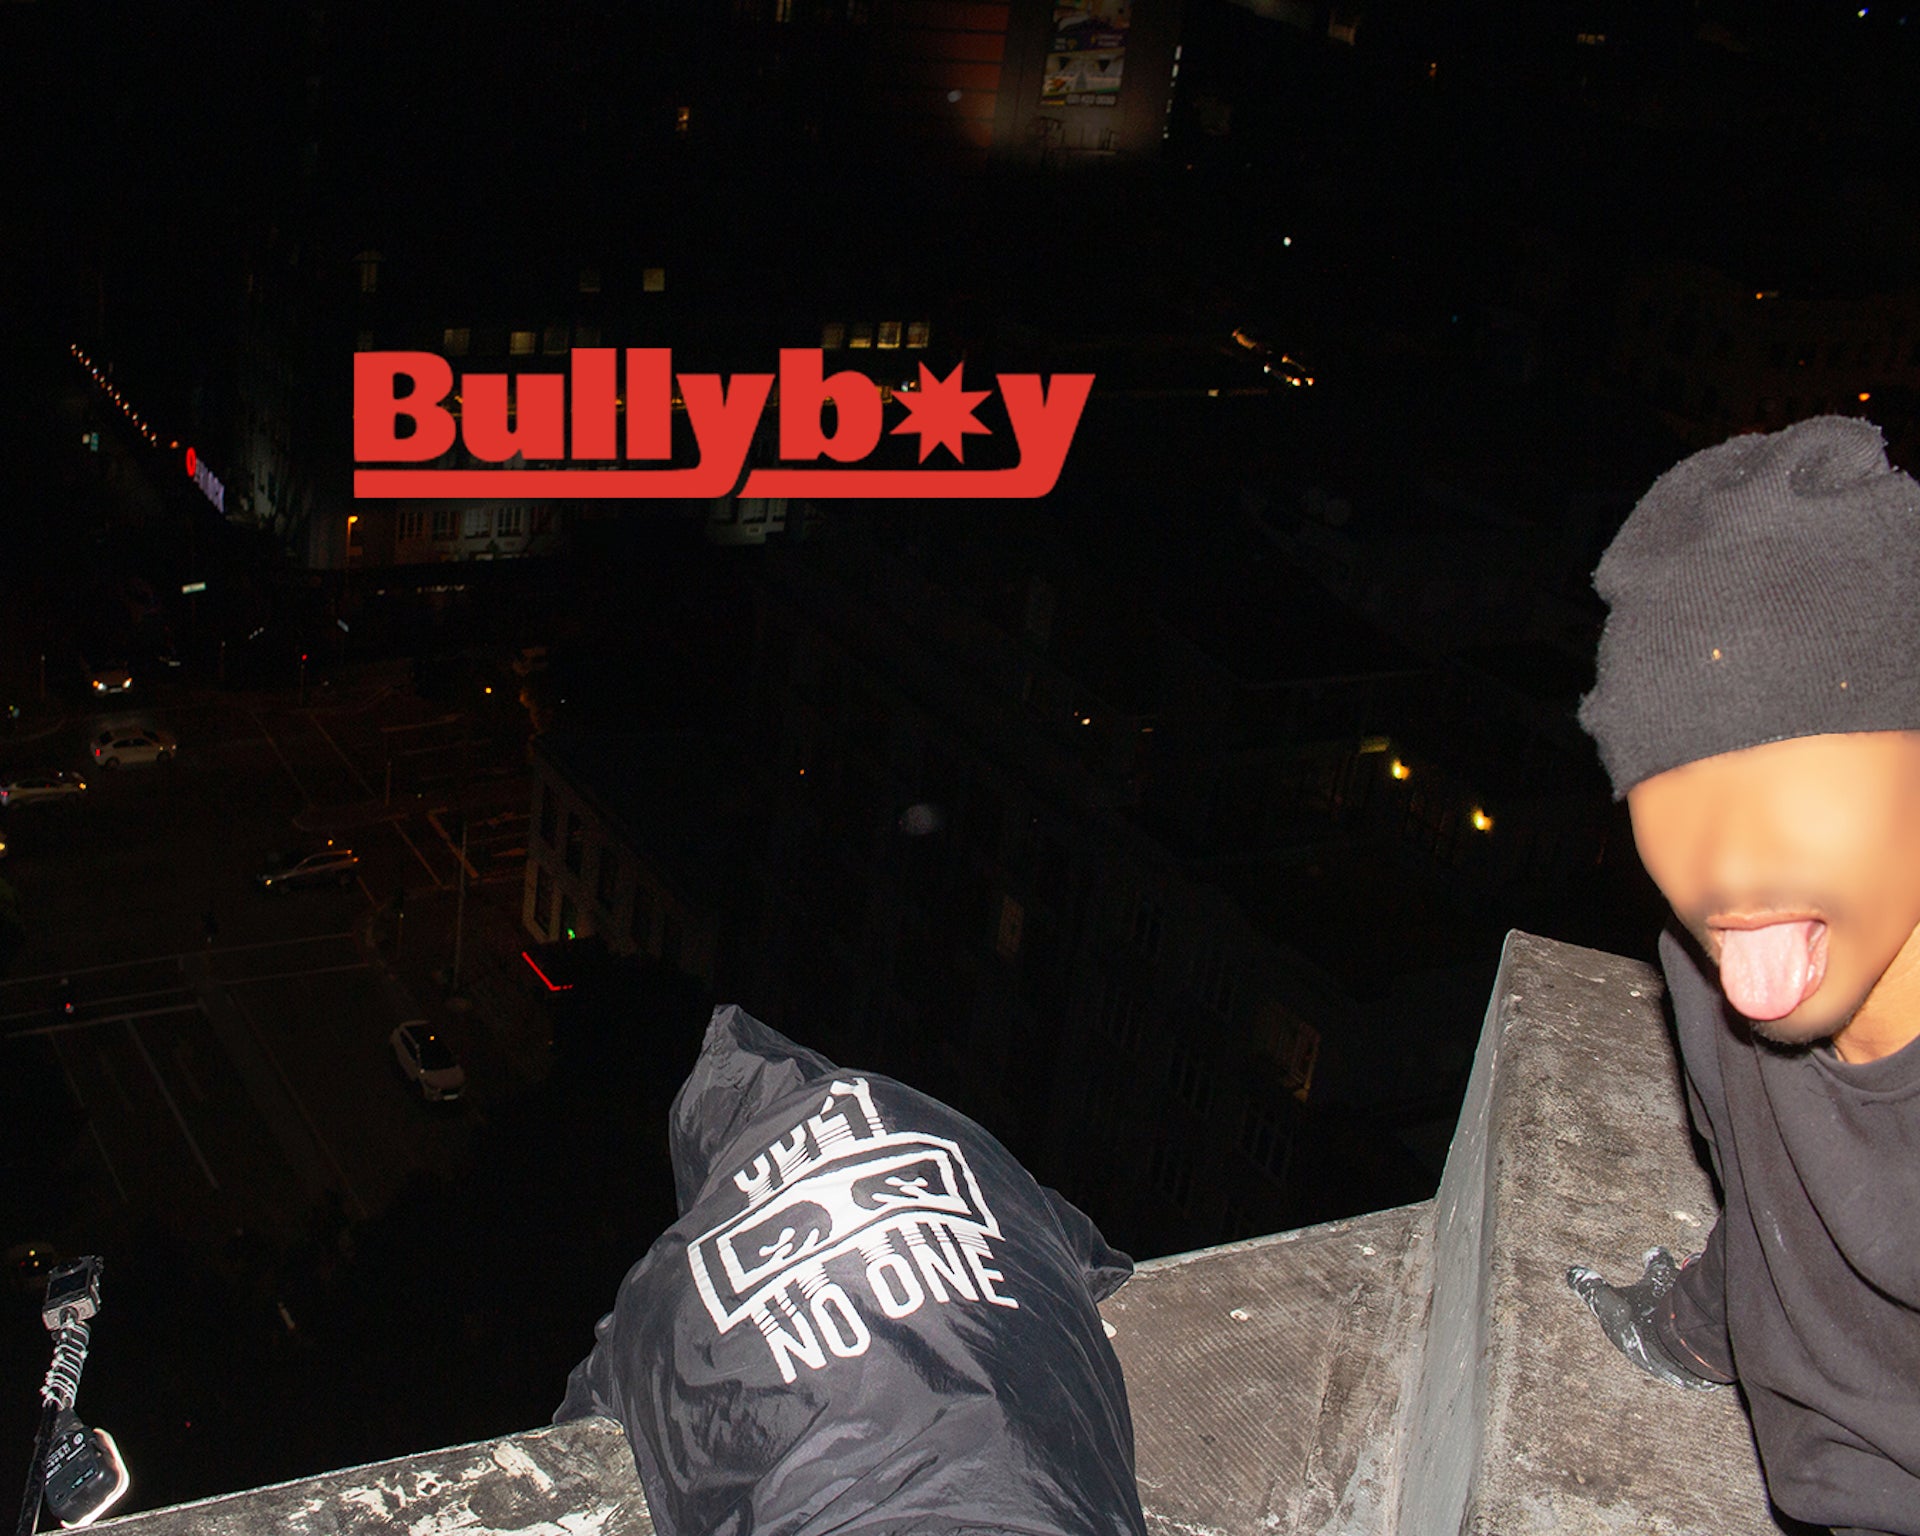 Bullyboy street mission candid photo on top of building